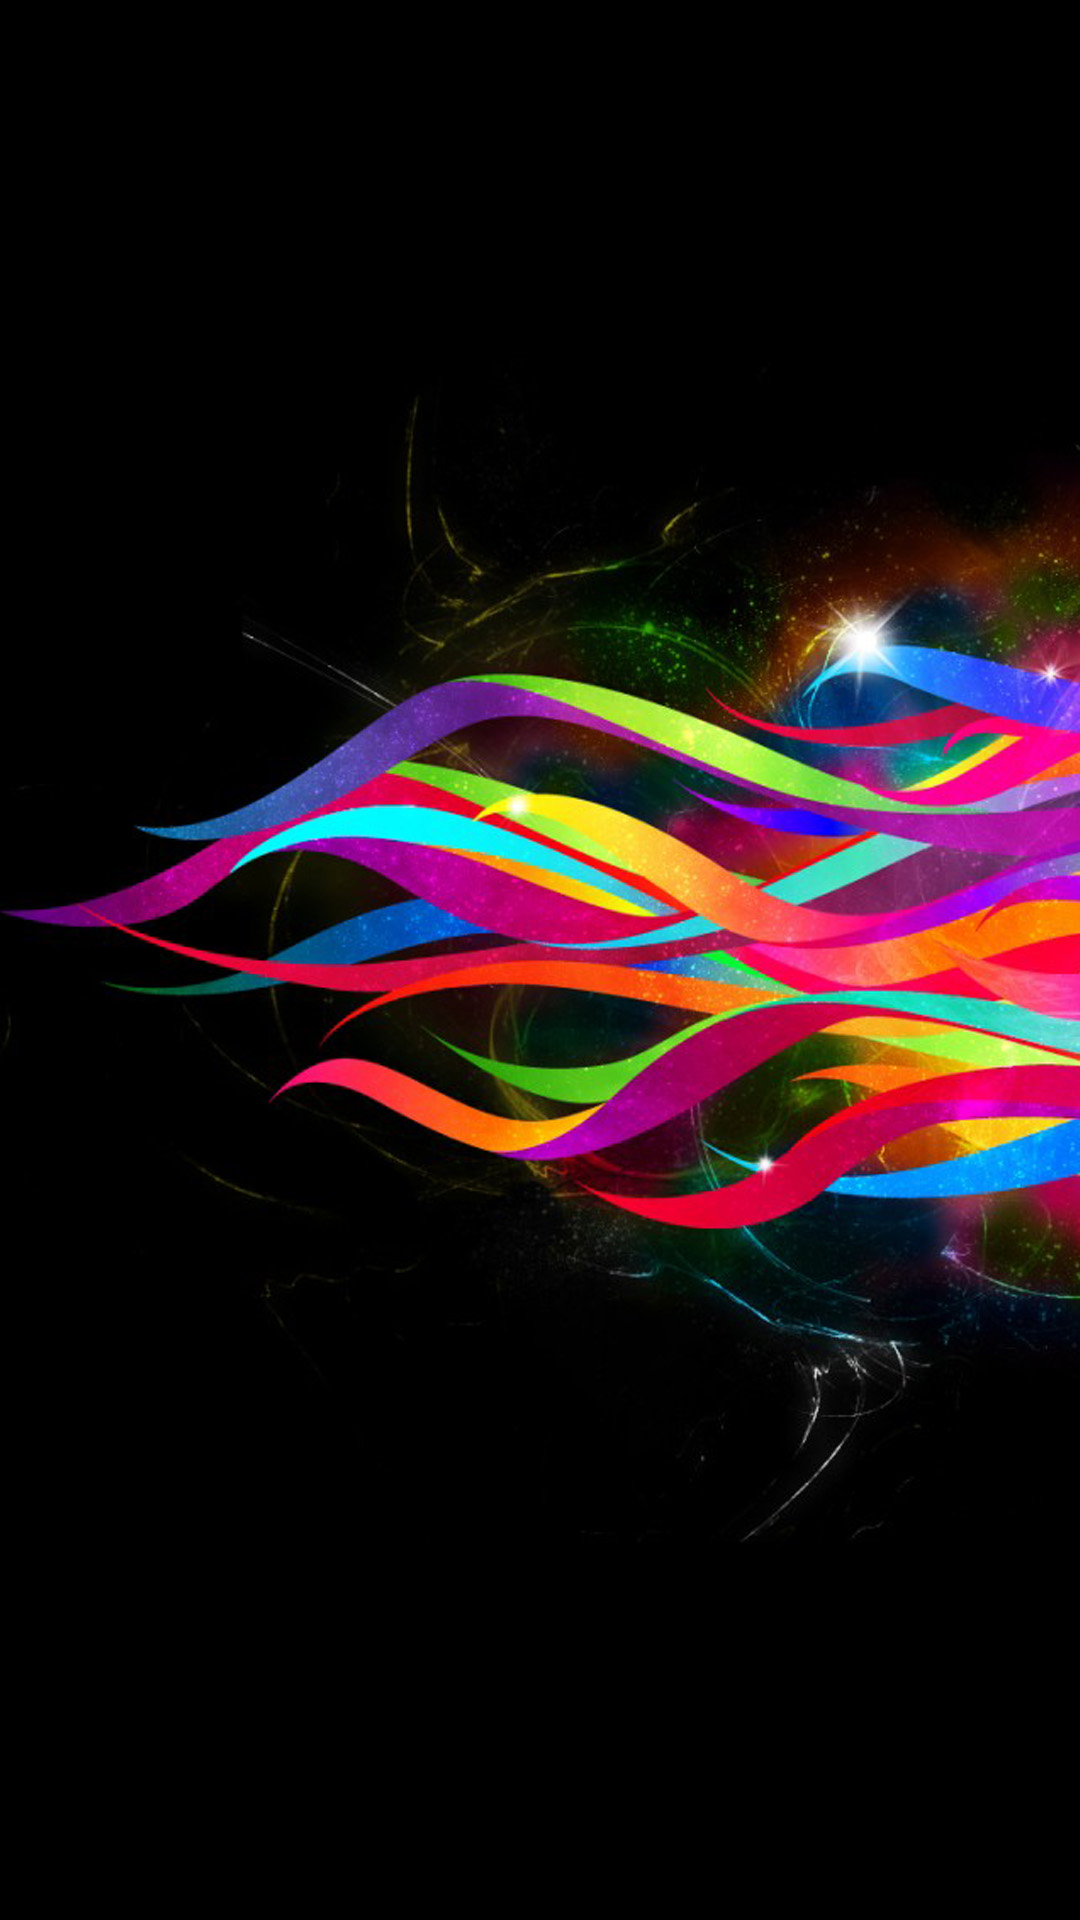 Colorful abstract lines